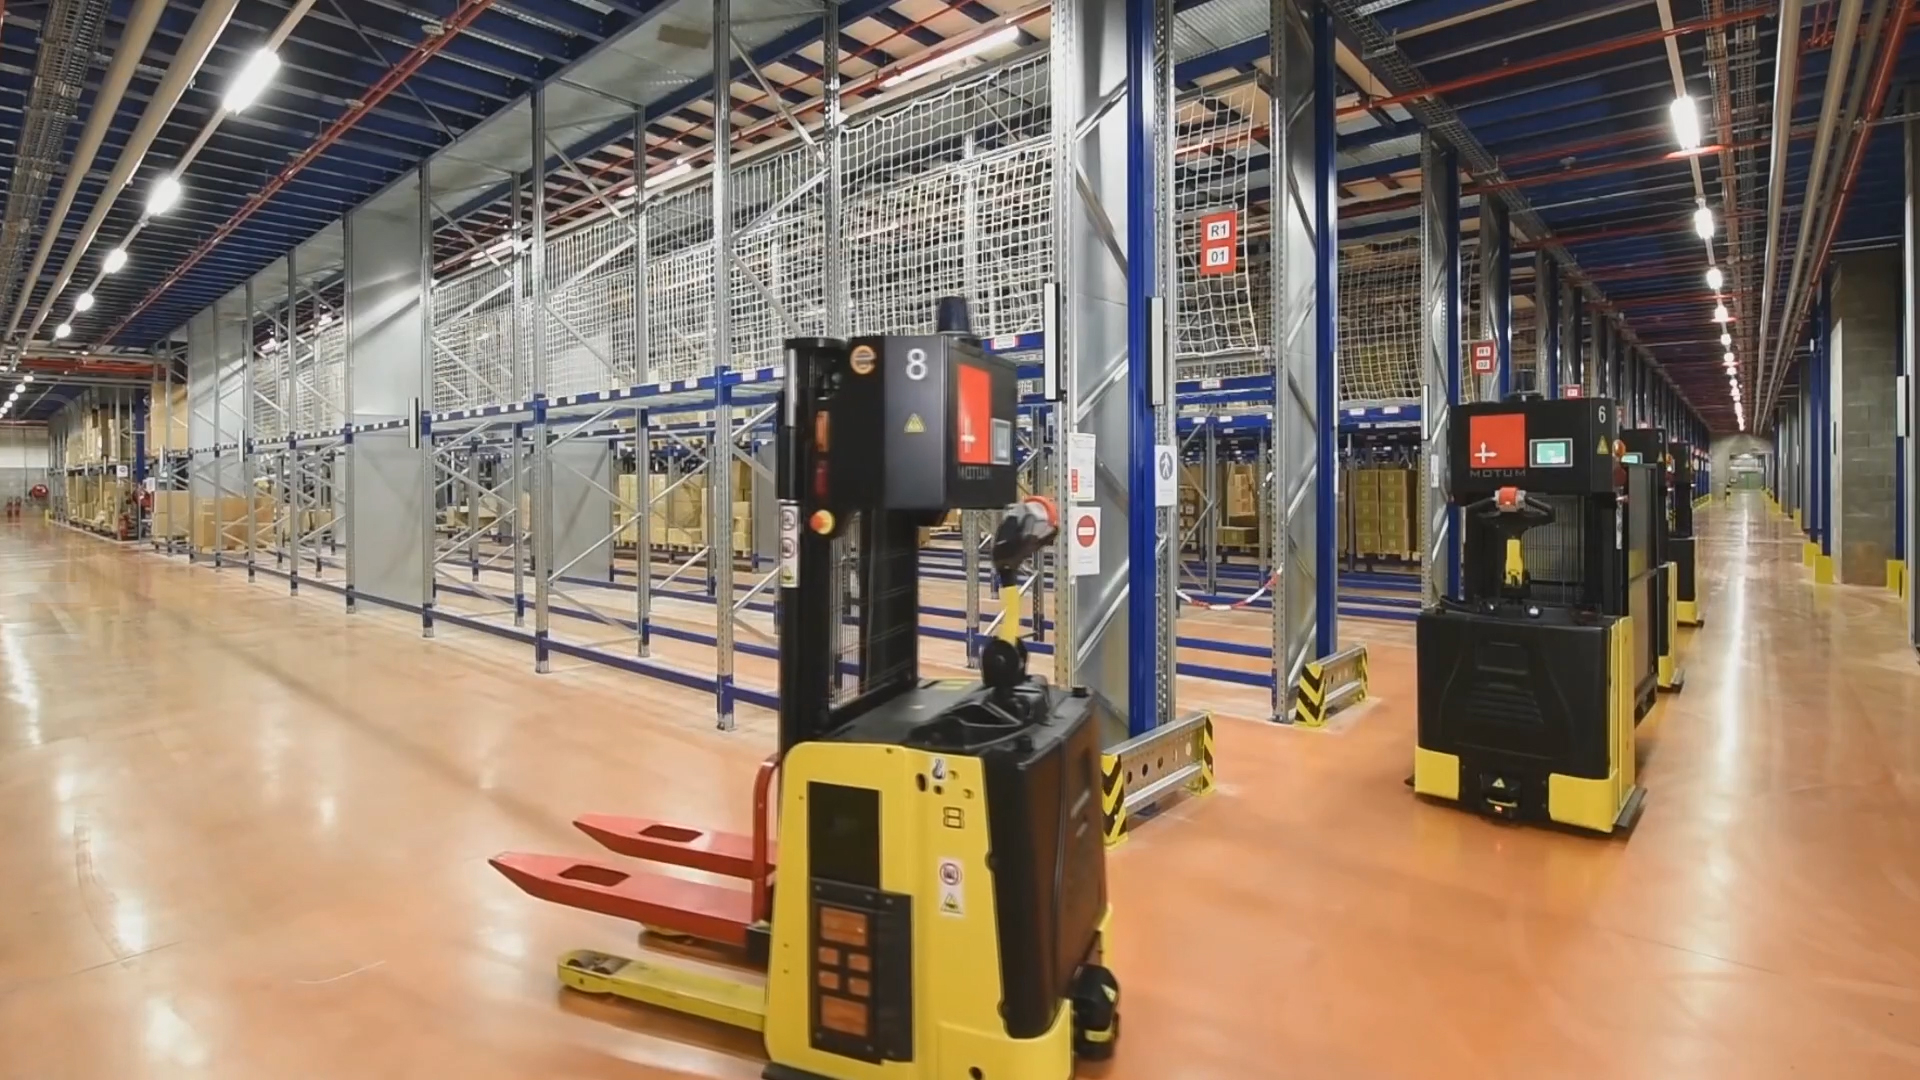 Introducing Ouster's 3D Industrial Sensor Suite for High-Volume Material Handling